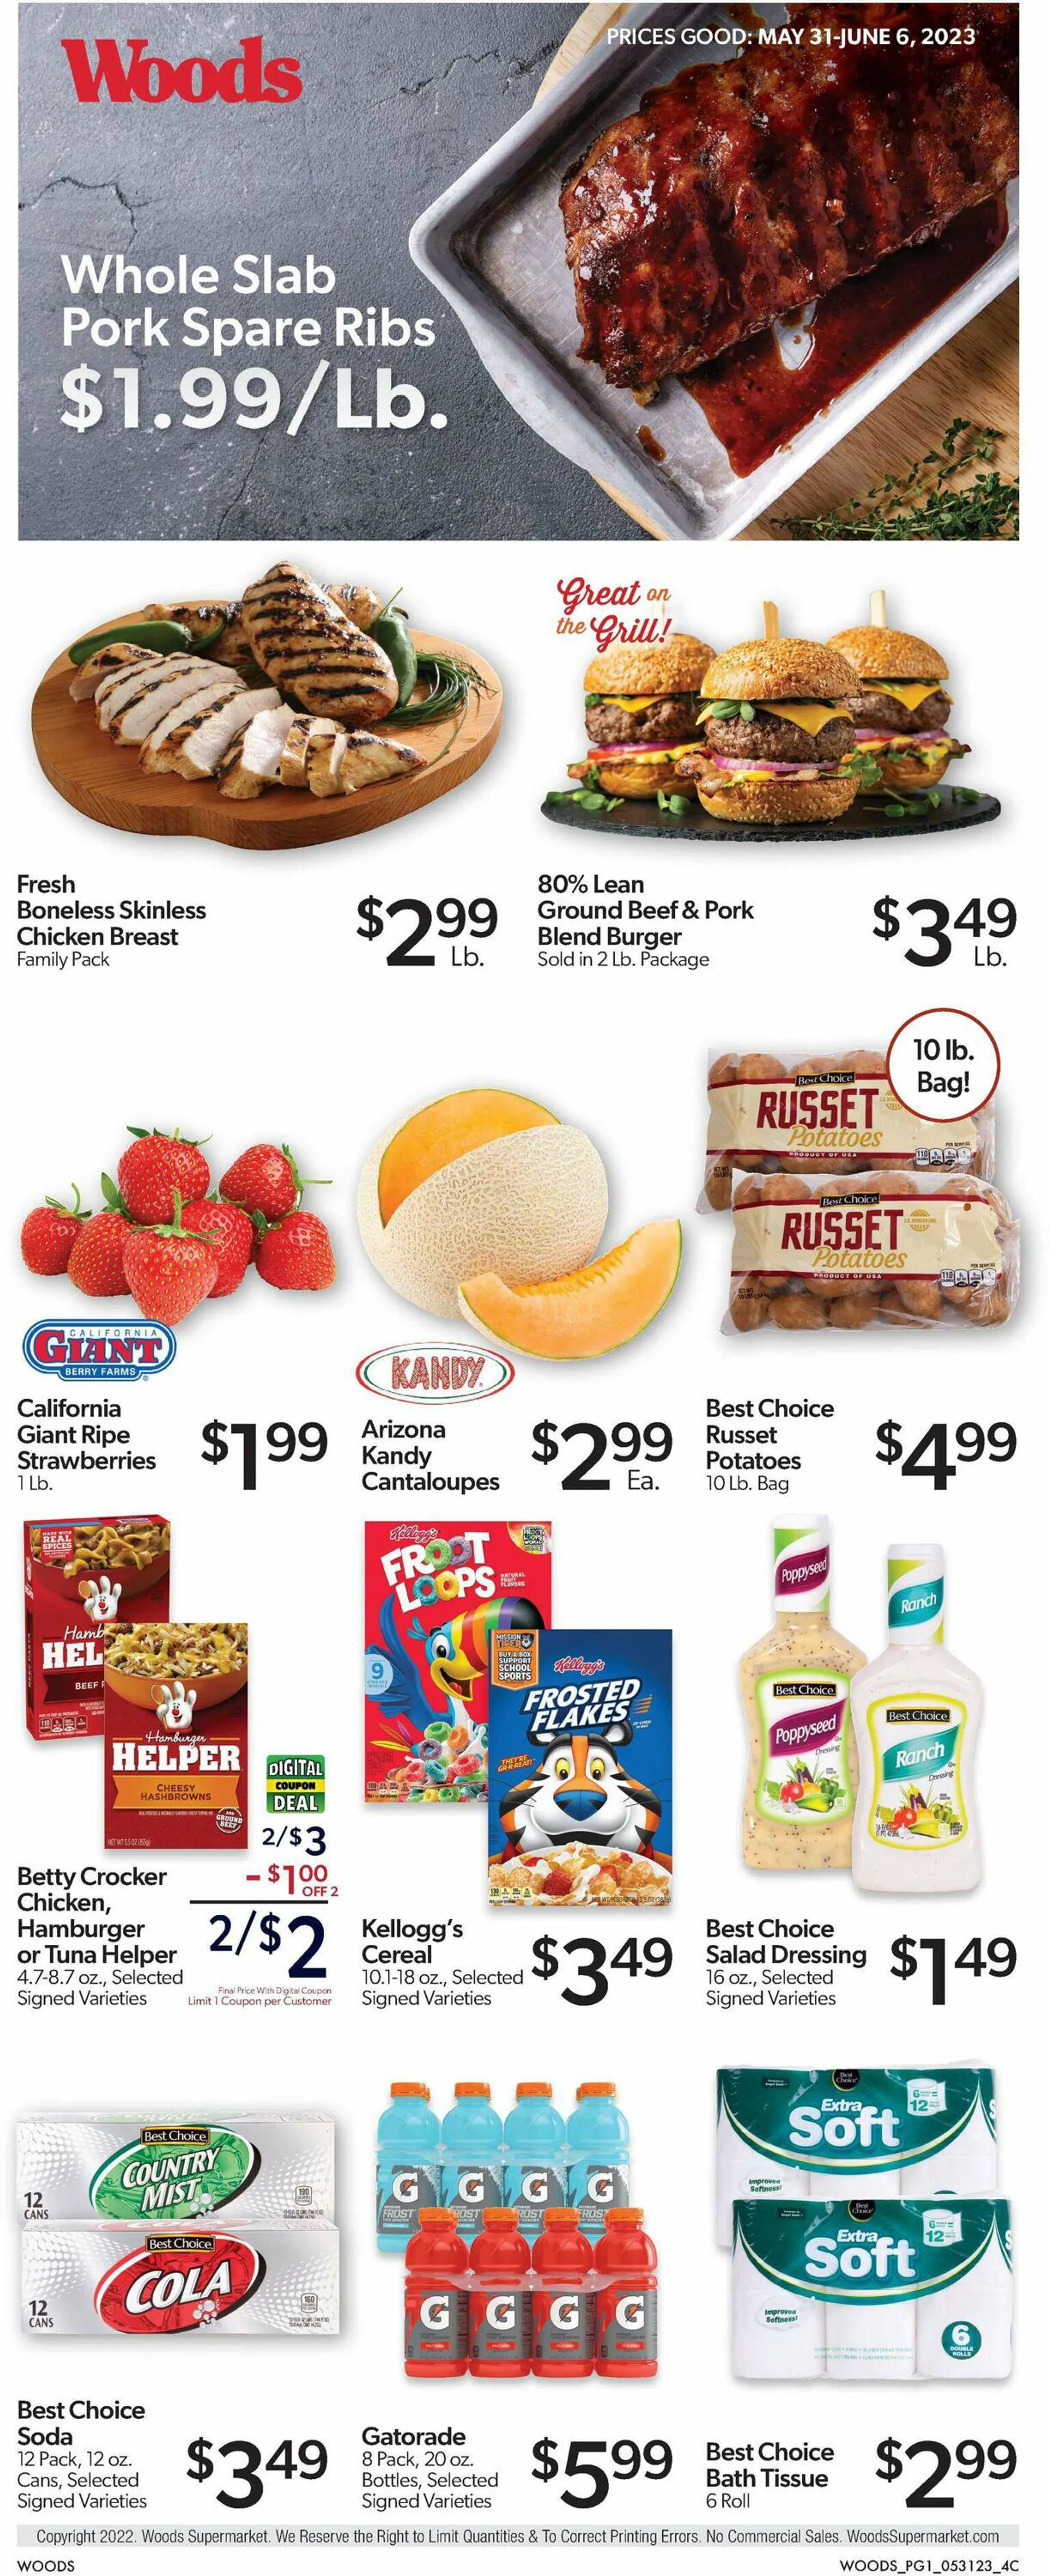 Woods Supermarket Current weekly ad